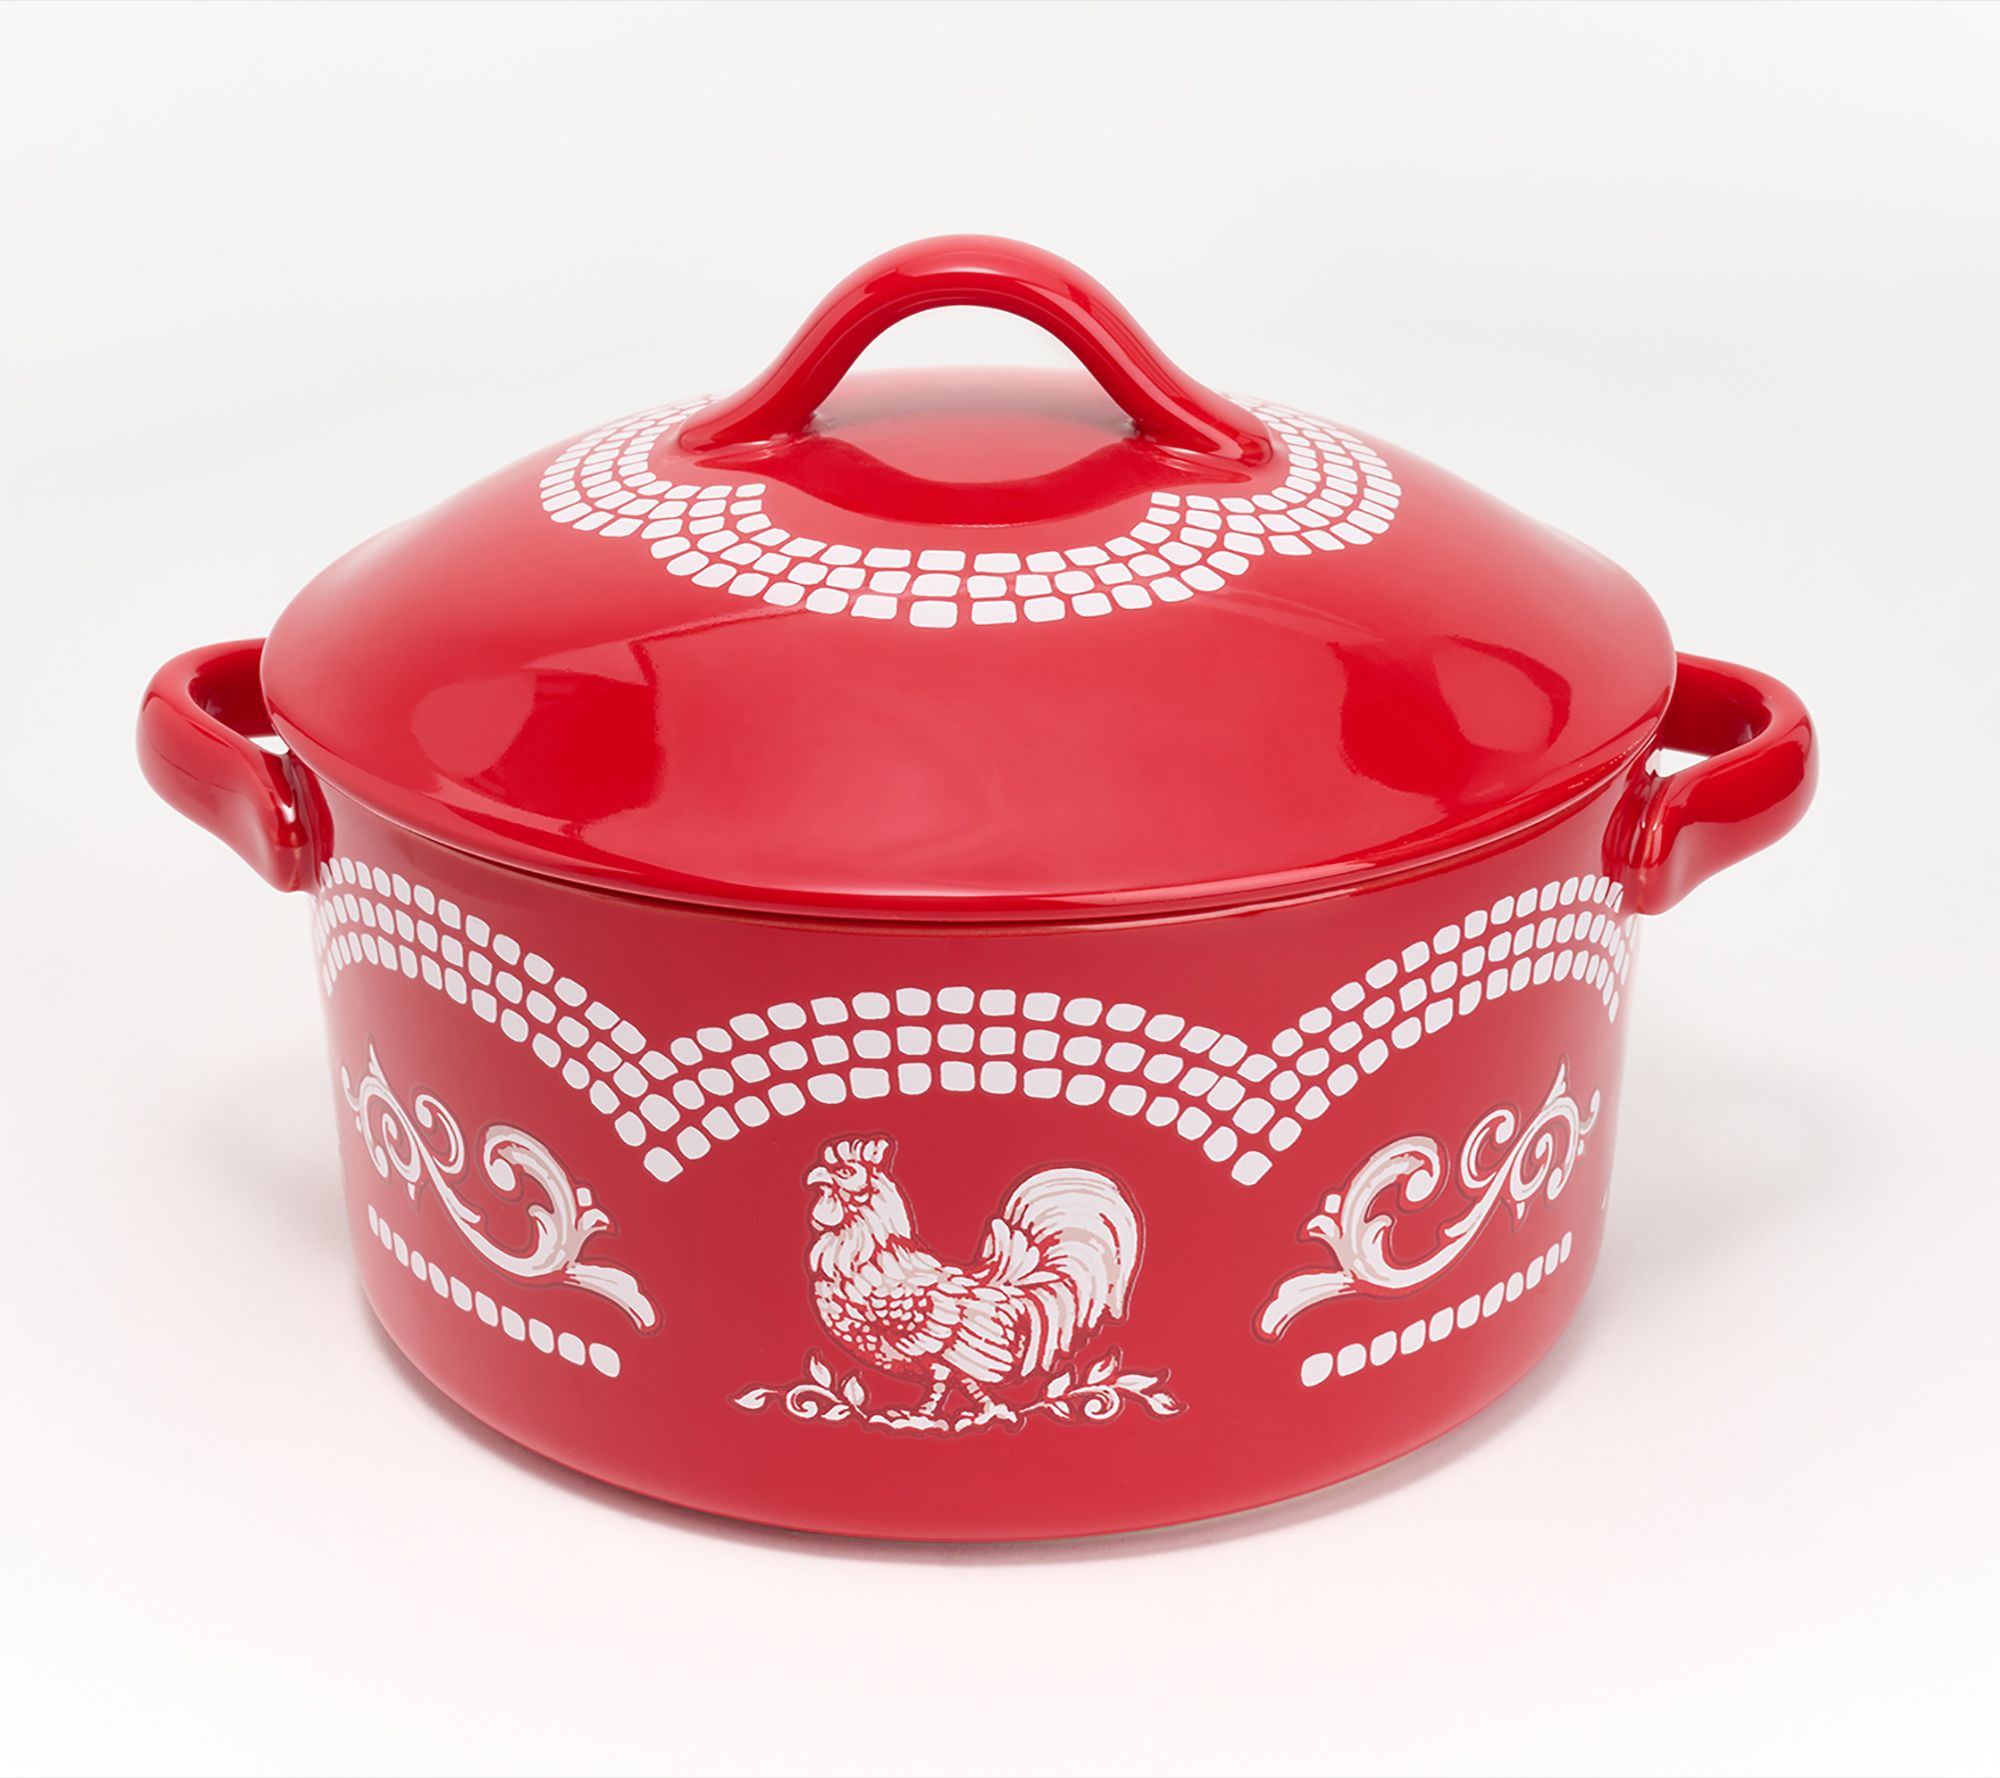 Temp-tations by Tara 9oz Dutch Oven with Carrier * Ivy & Red Cardinal Decor